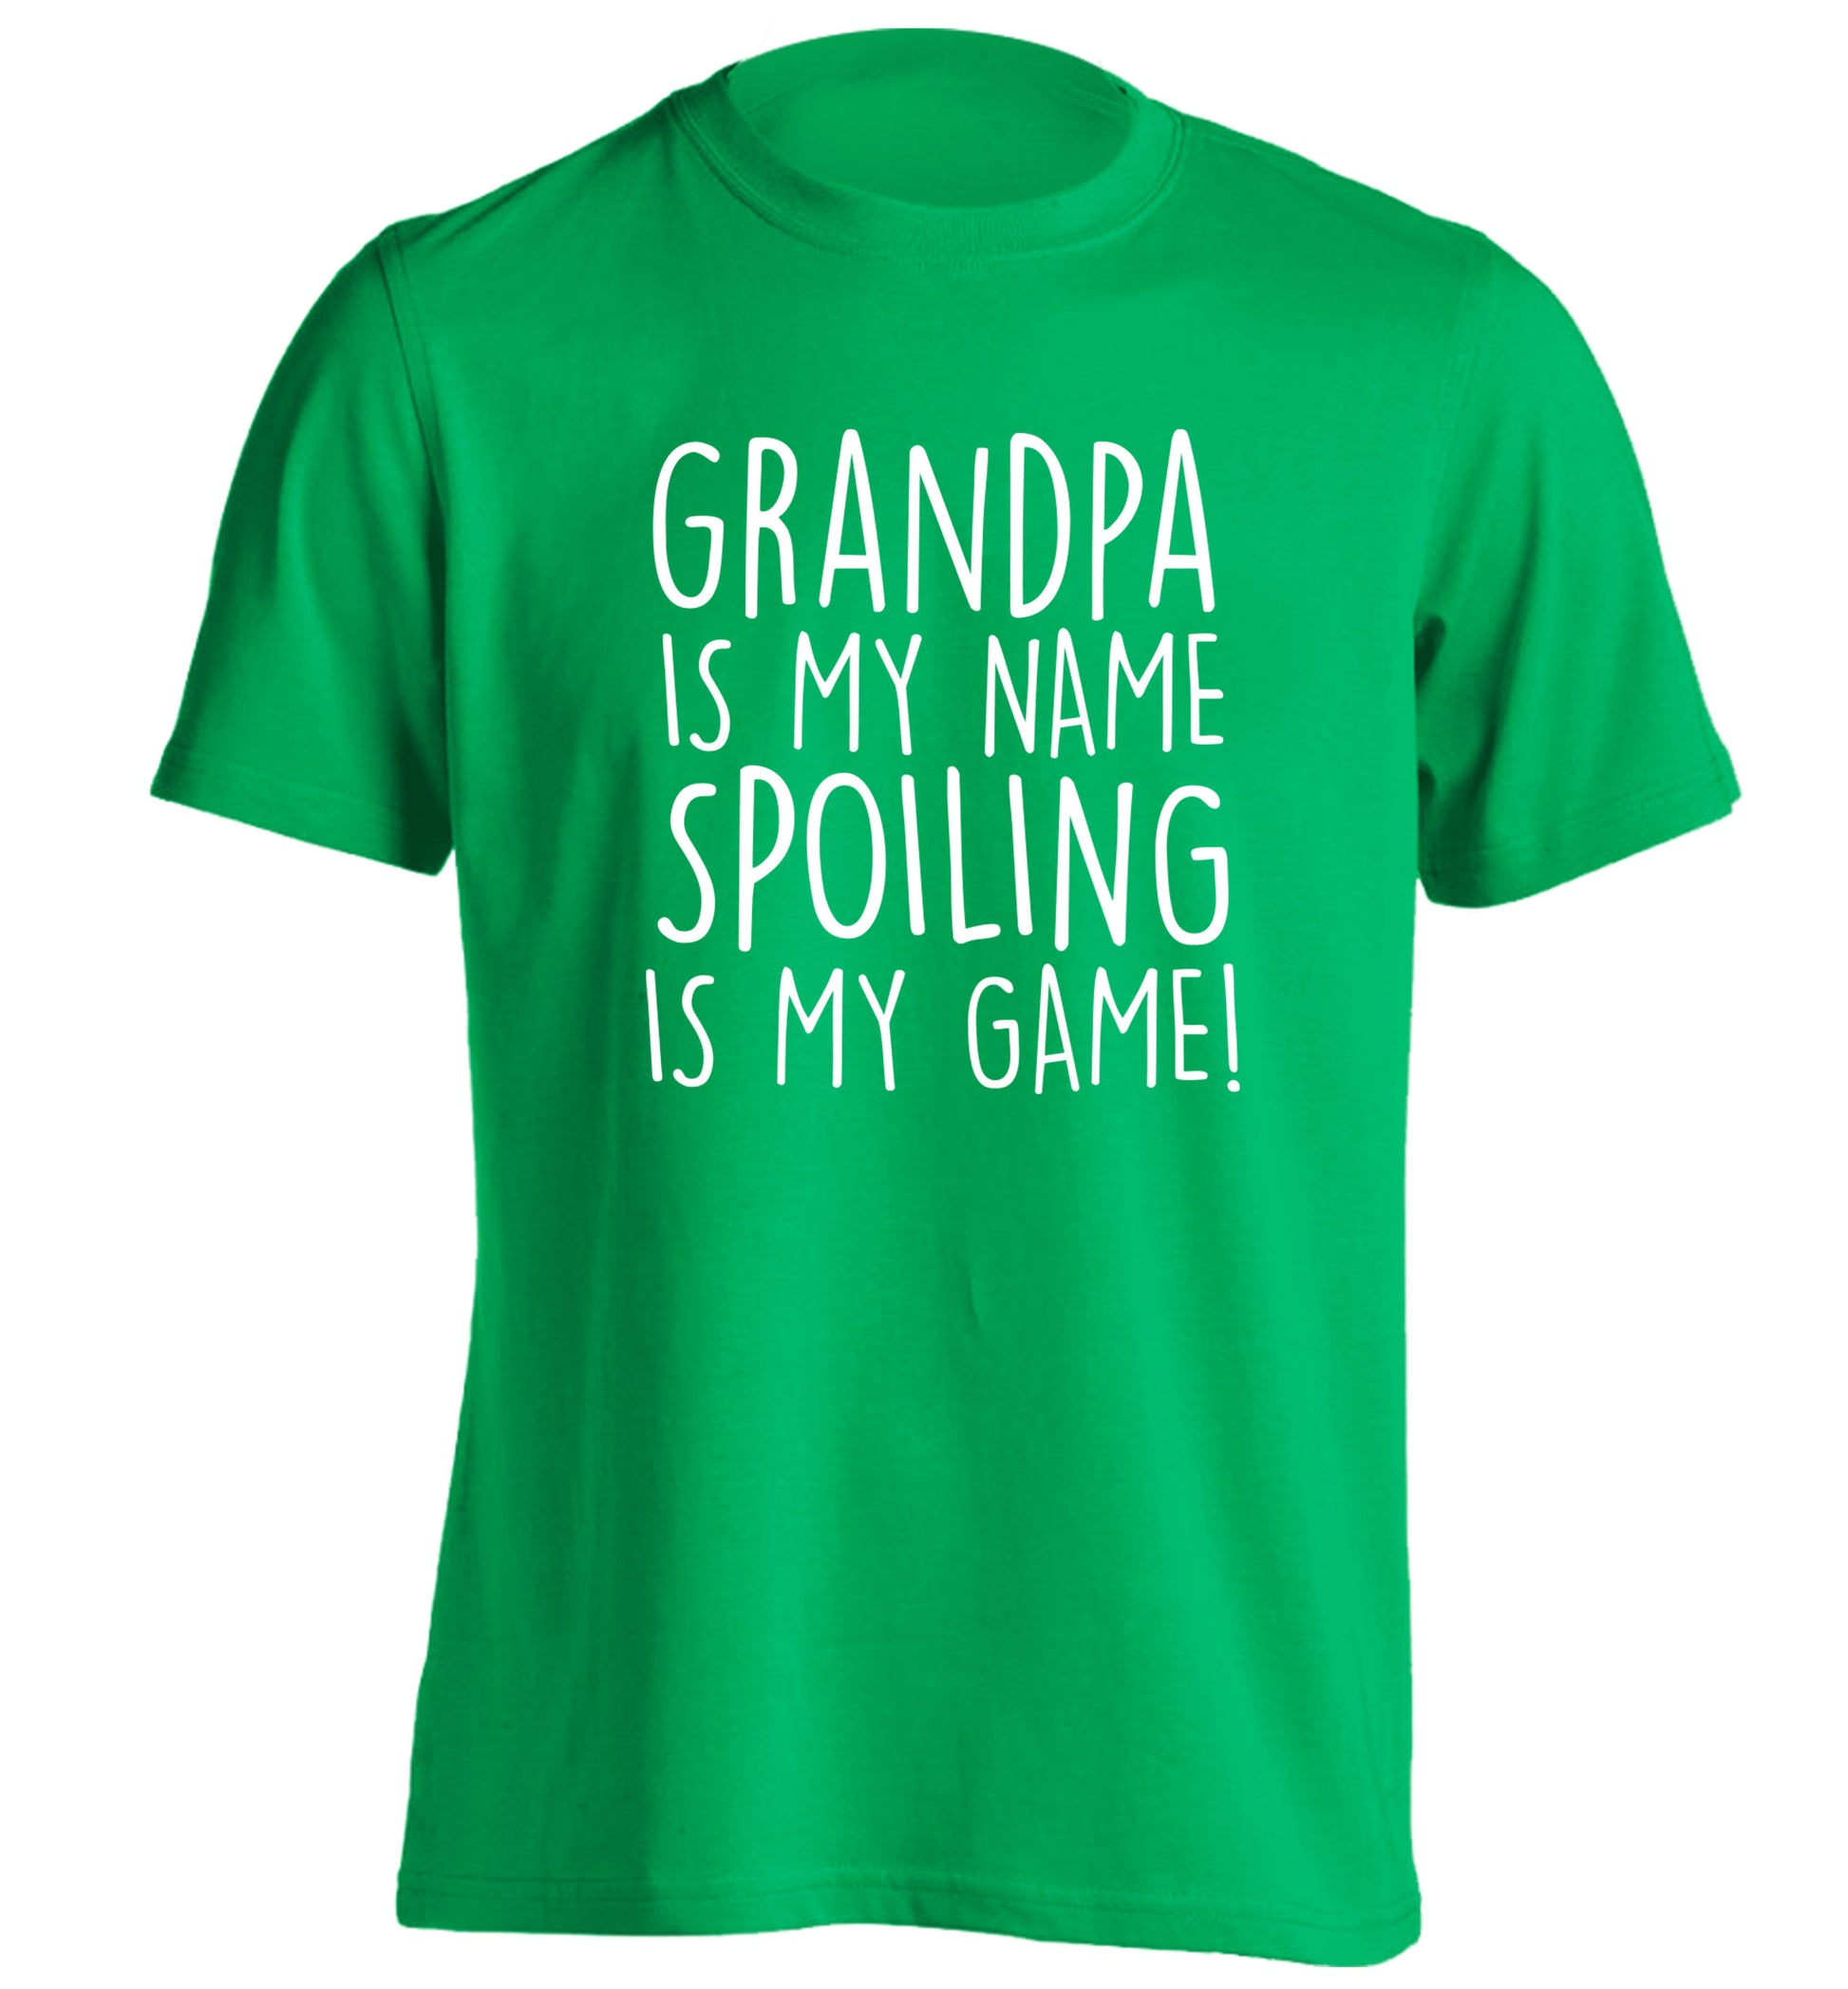 Grandpa is my name, spoiling is my game adults unisex green Tshirt 2XL